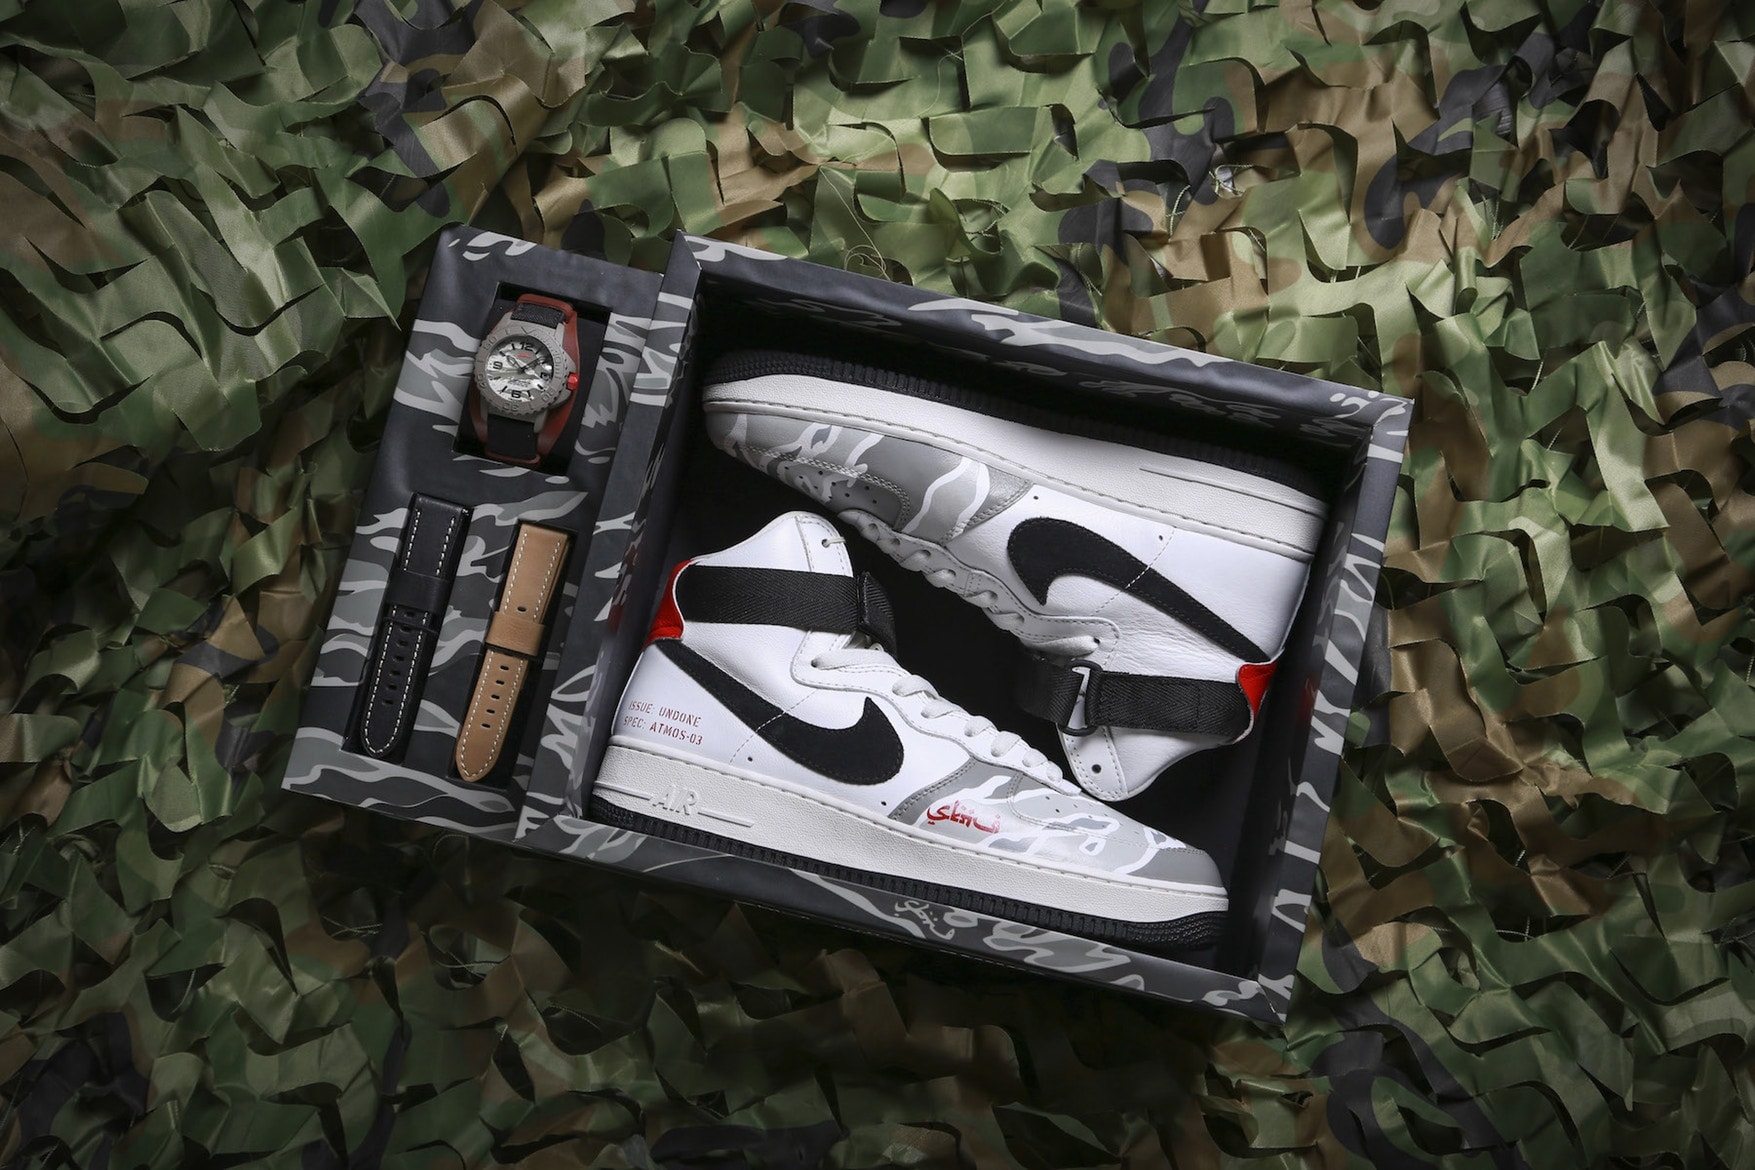 UNDONE SBTG atmos Nike Air Force 1 High Watch Camo Camouflage 2017 November 11 12 Release Date Info Sneakers Shoes Footwear Strap Band Custom Limited Drop CON